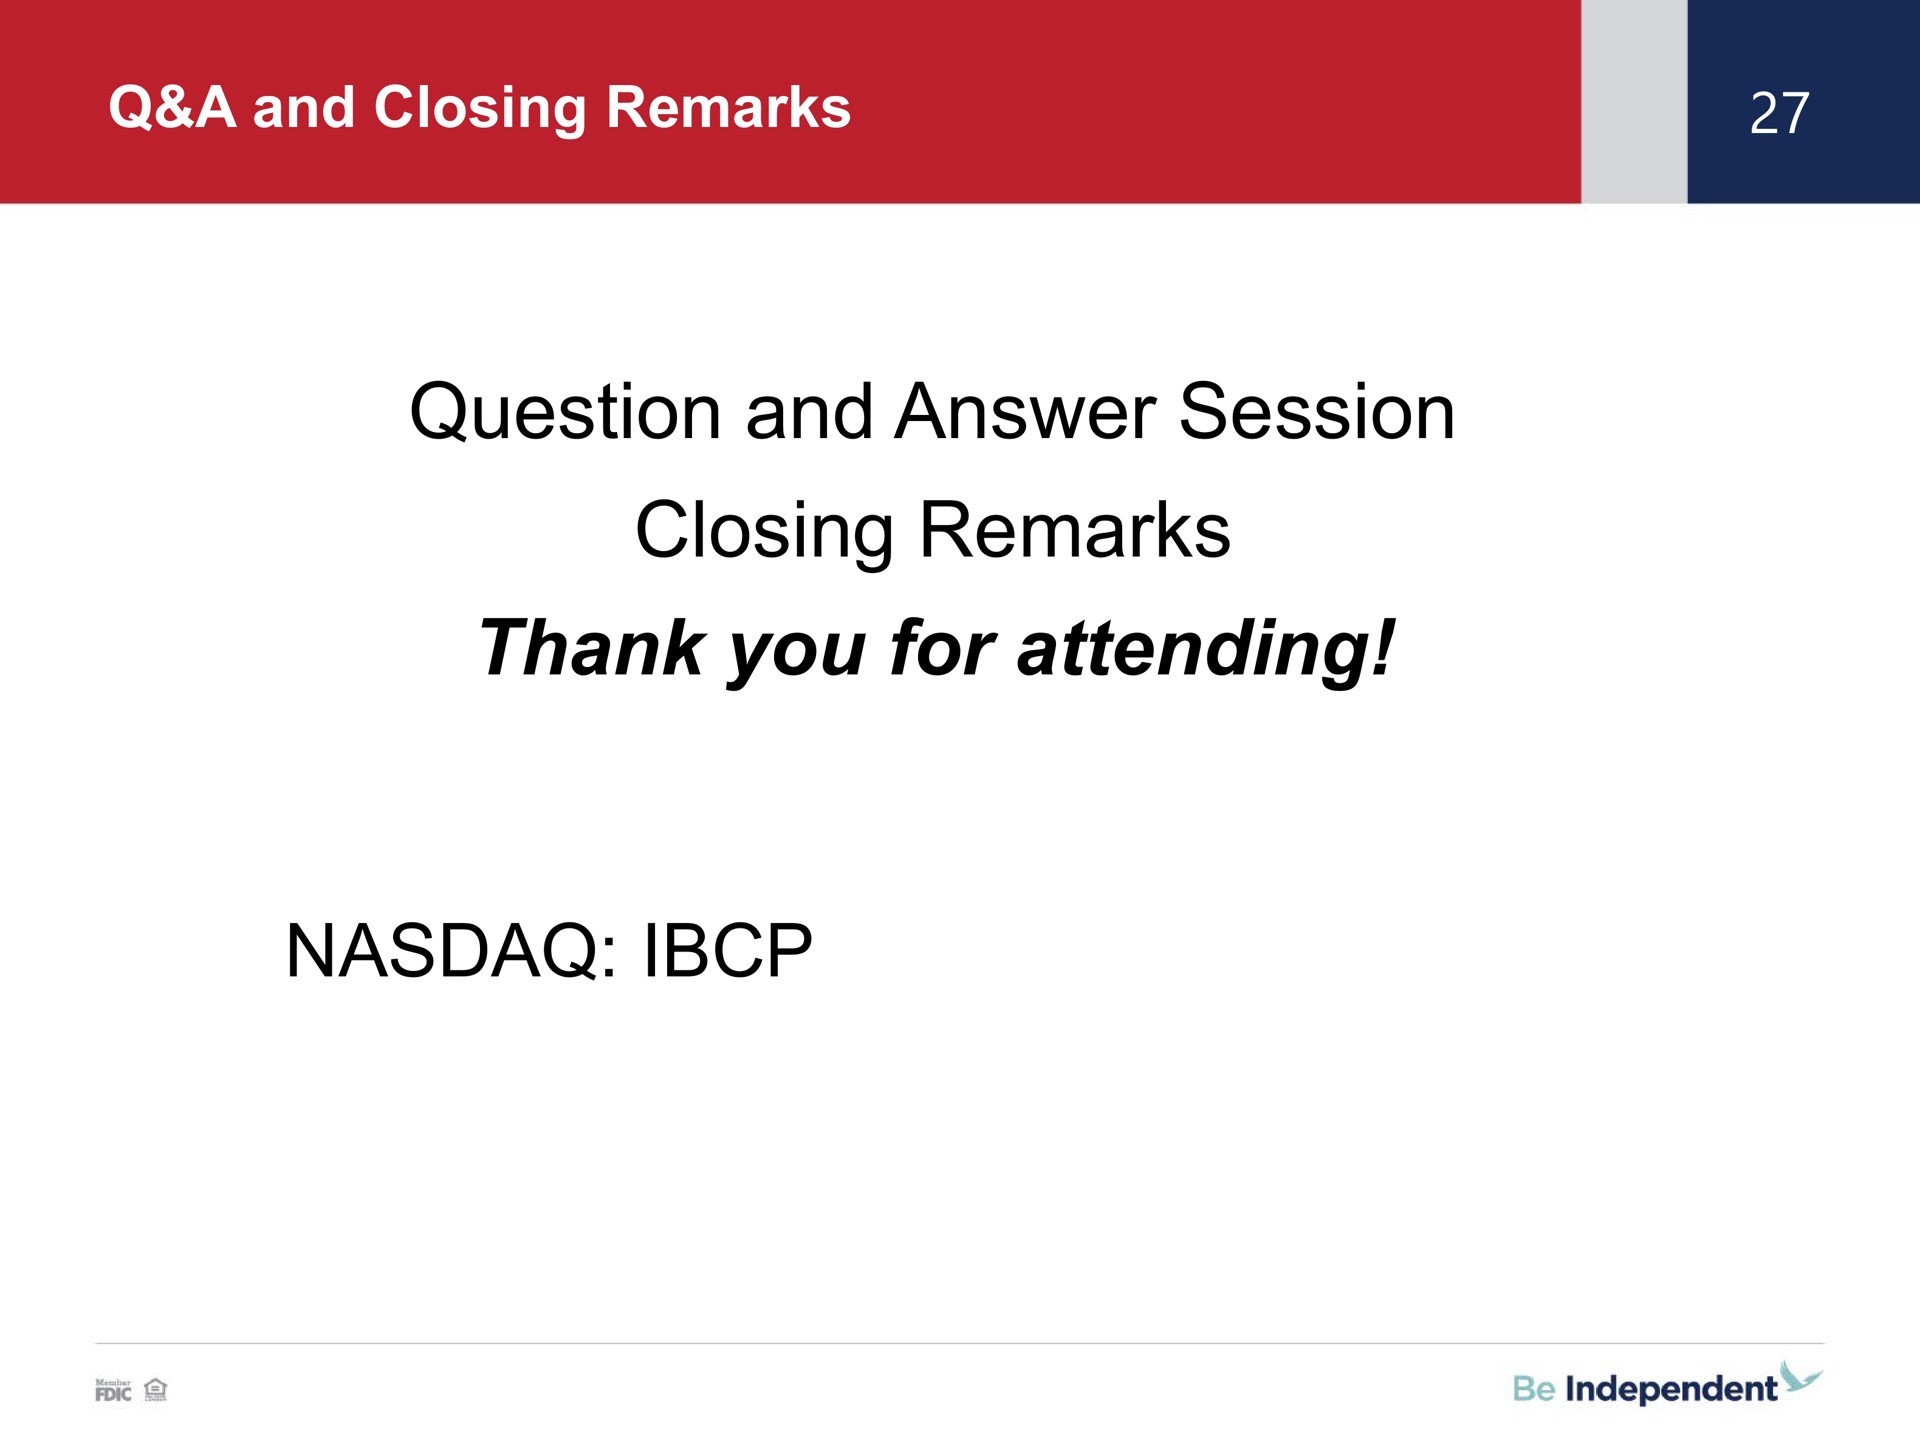 a and closing remarks question and answer session closing remarks thank you for attending | Independent Bank Corp